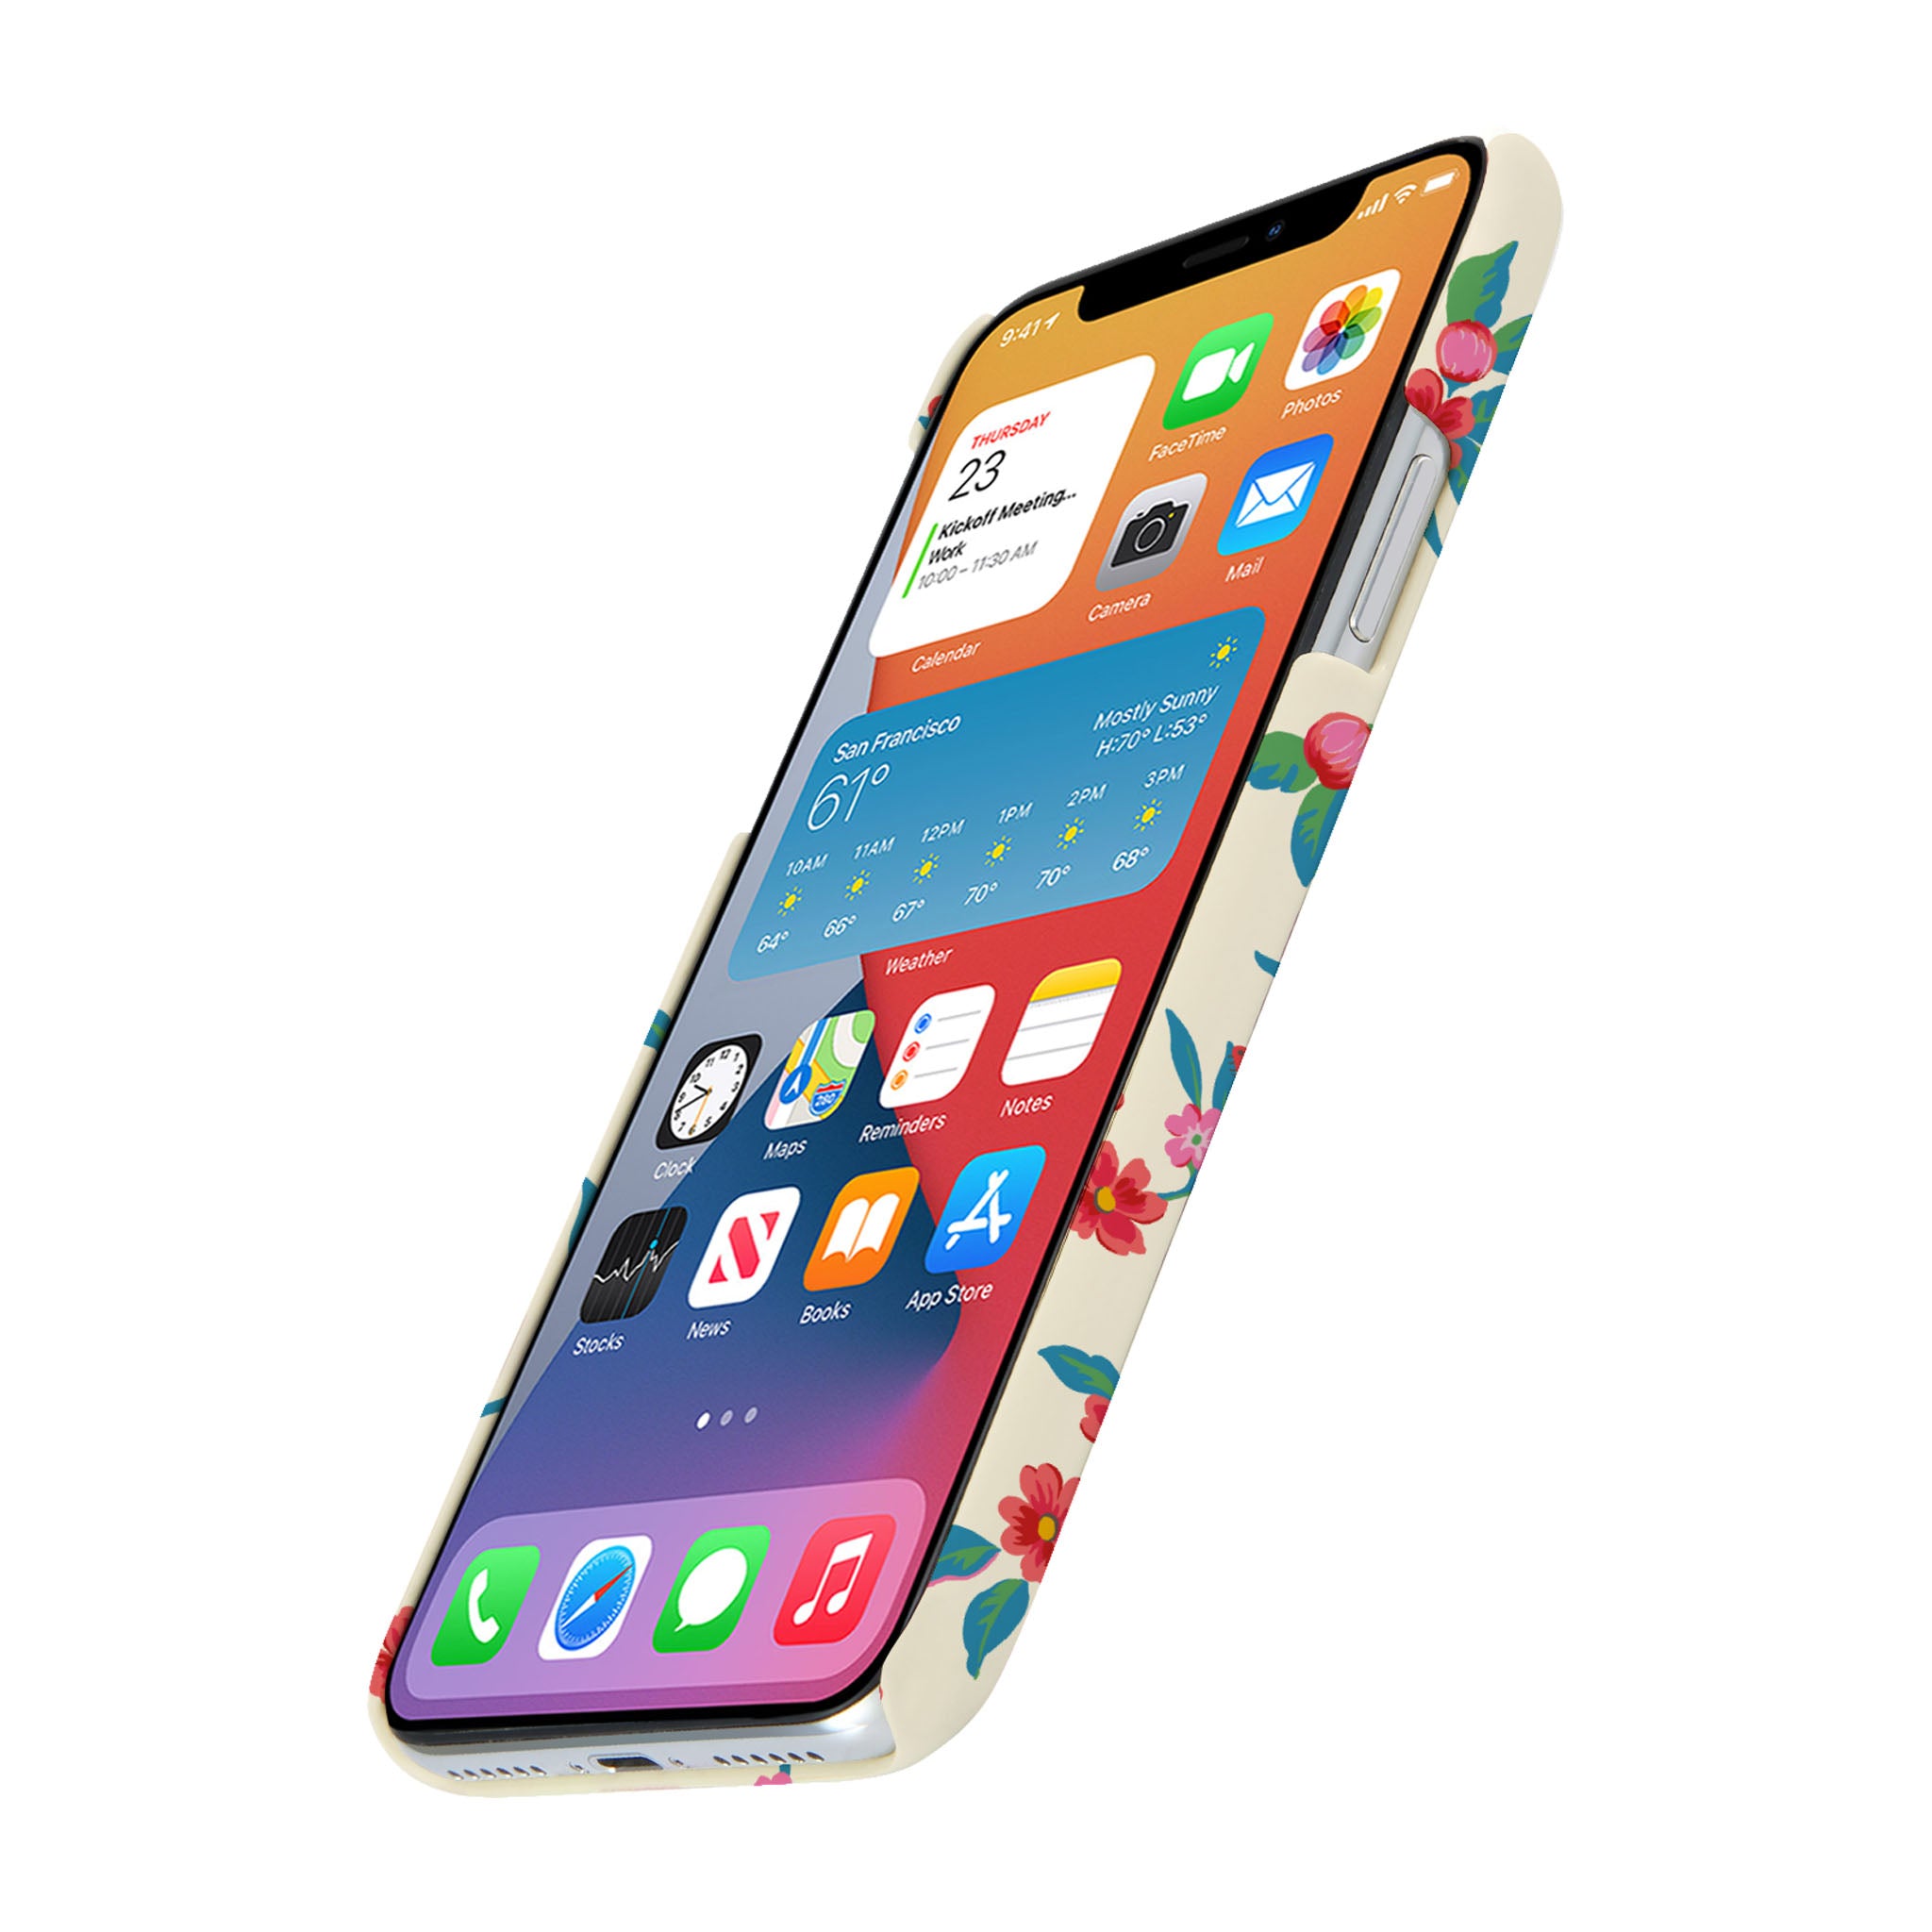 The MYVQ iPhone X/XS series premium high gloss scratch-resistant phone case. Featuring a luxurious microfiber insert to cradle and protect your smartphone device.  